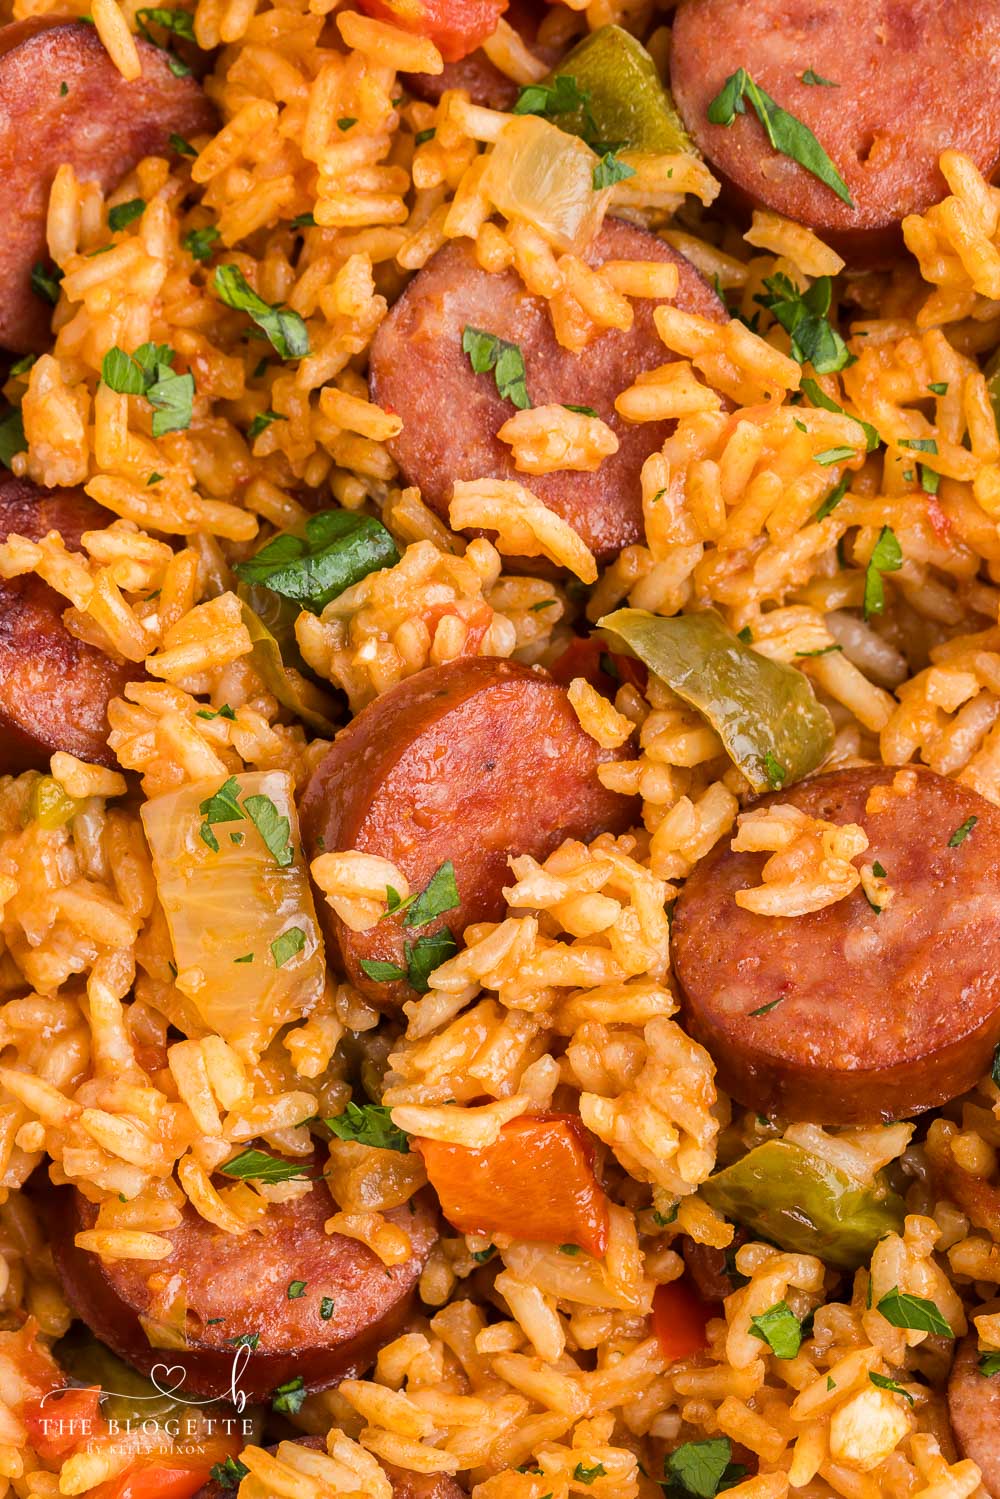 This Sausage and Rice Skillet features smoky sausage sizzled with sweet bell pepper, onions, and garlic in vibrant tomato sauce.